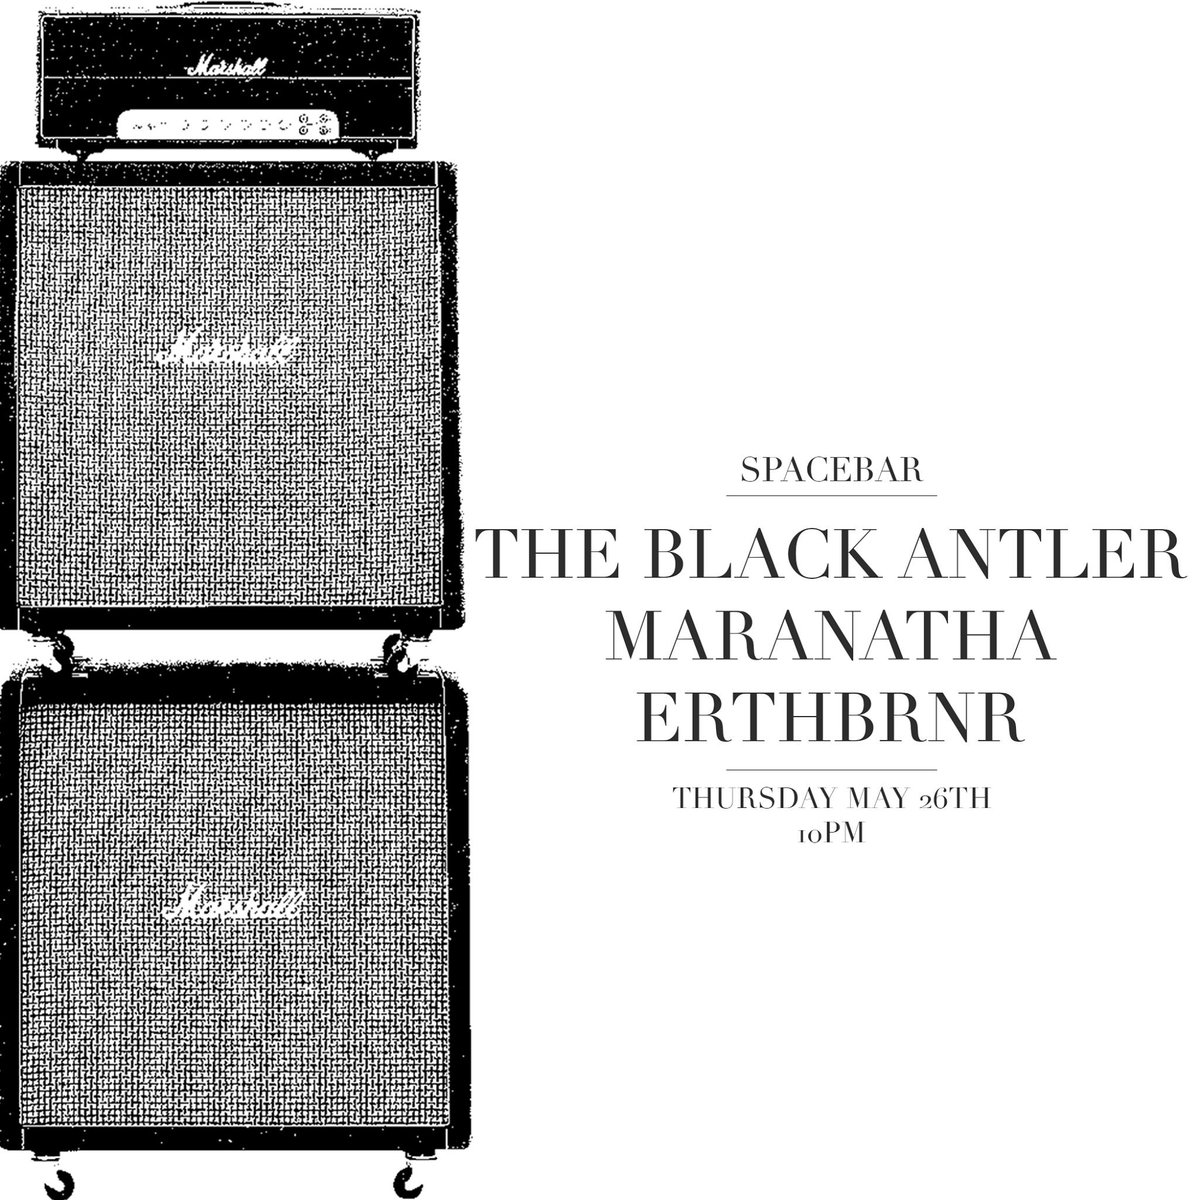 Miss us yet? We’re playing another banger on Thursday w/ EARTHBURNER & THE BLACK ANTLER.
facebook.com/events/1715431…